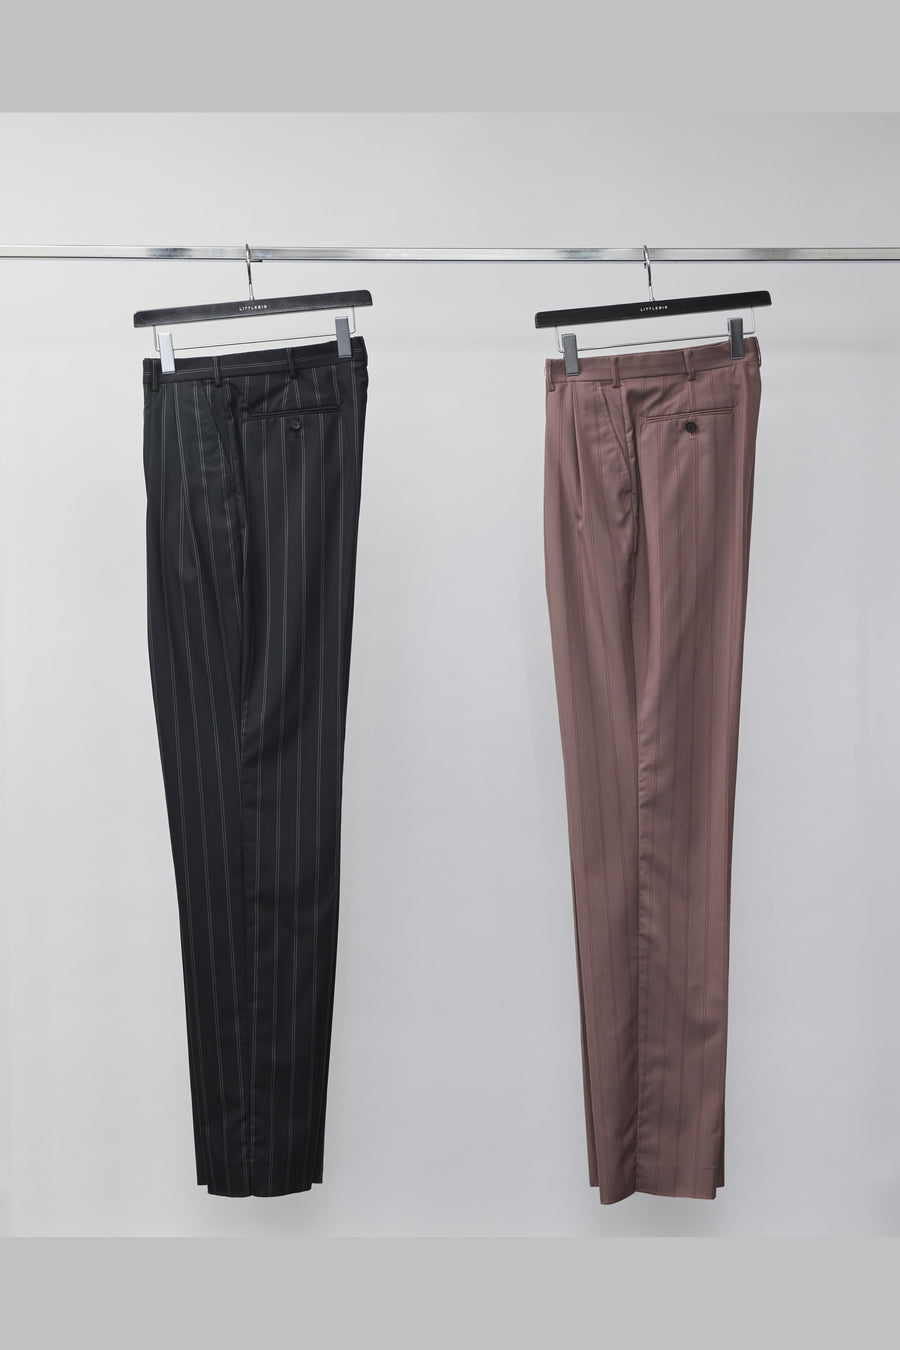 LITTLEBIG(リトルビッグ)の22ss Tucked Tapered Trousers Black